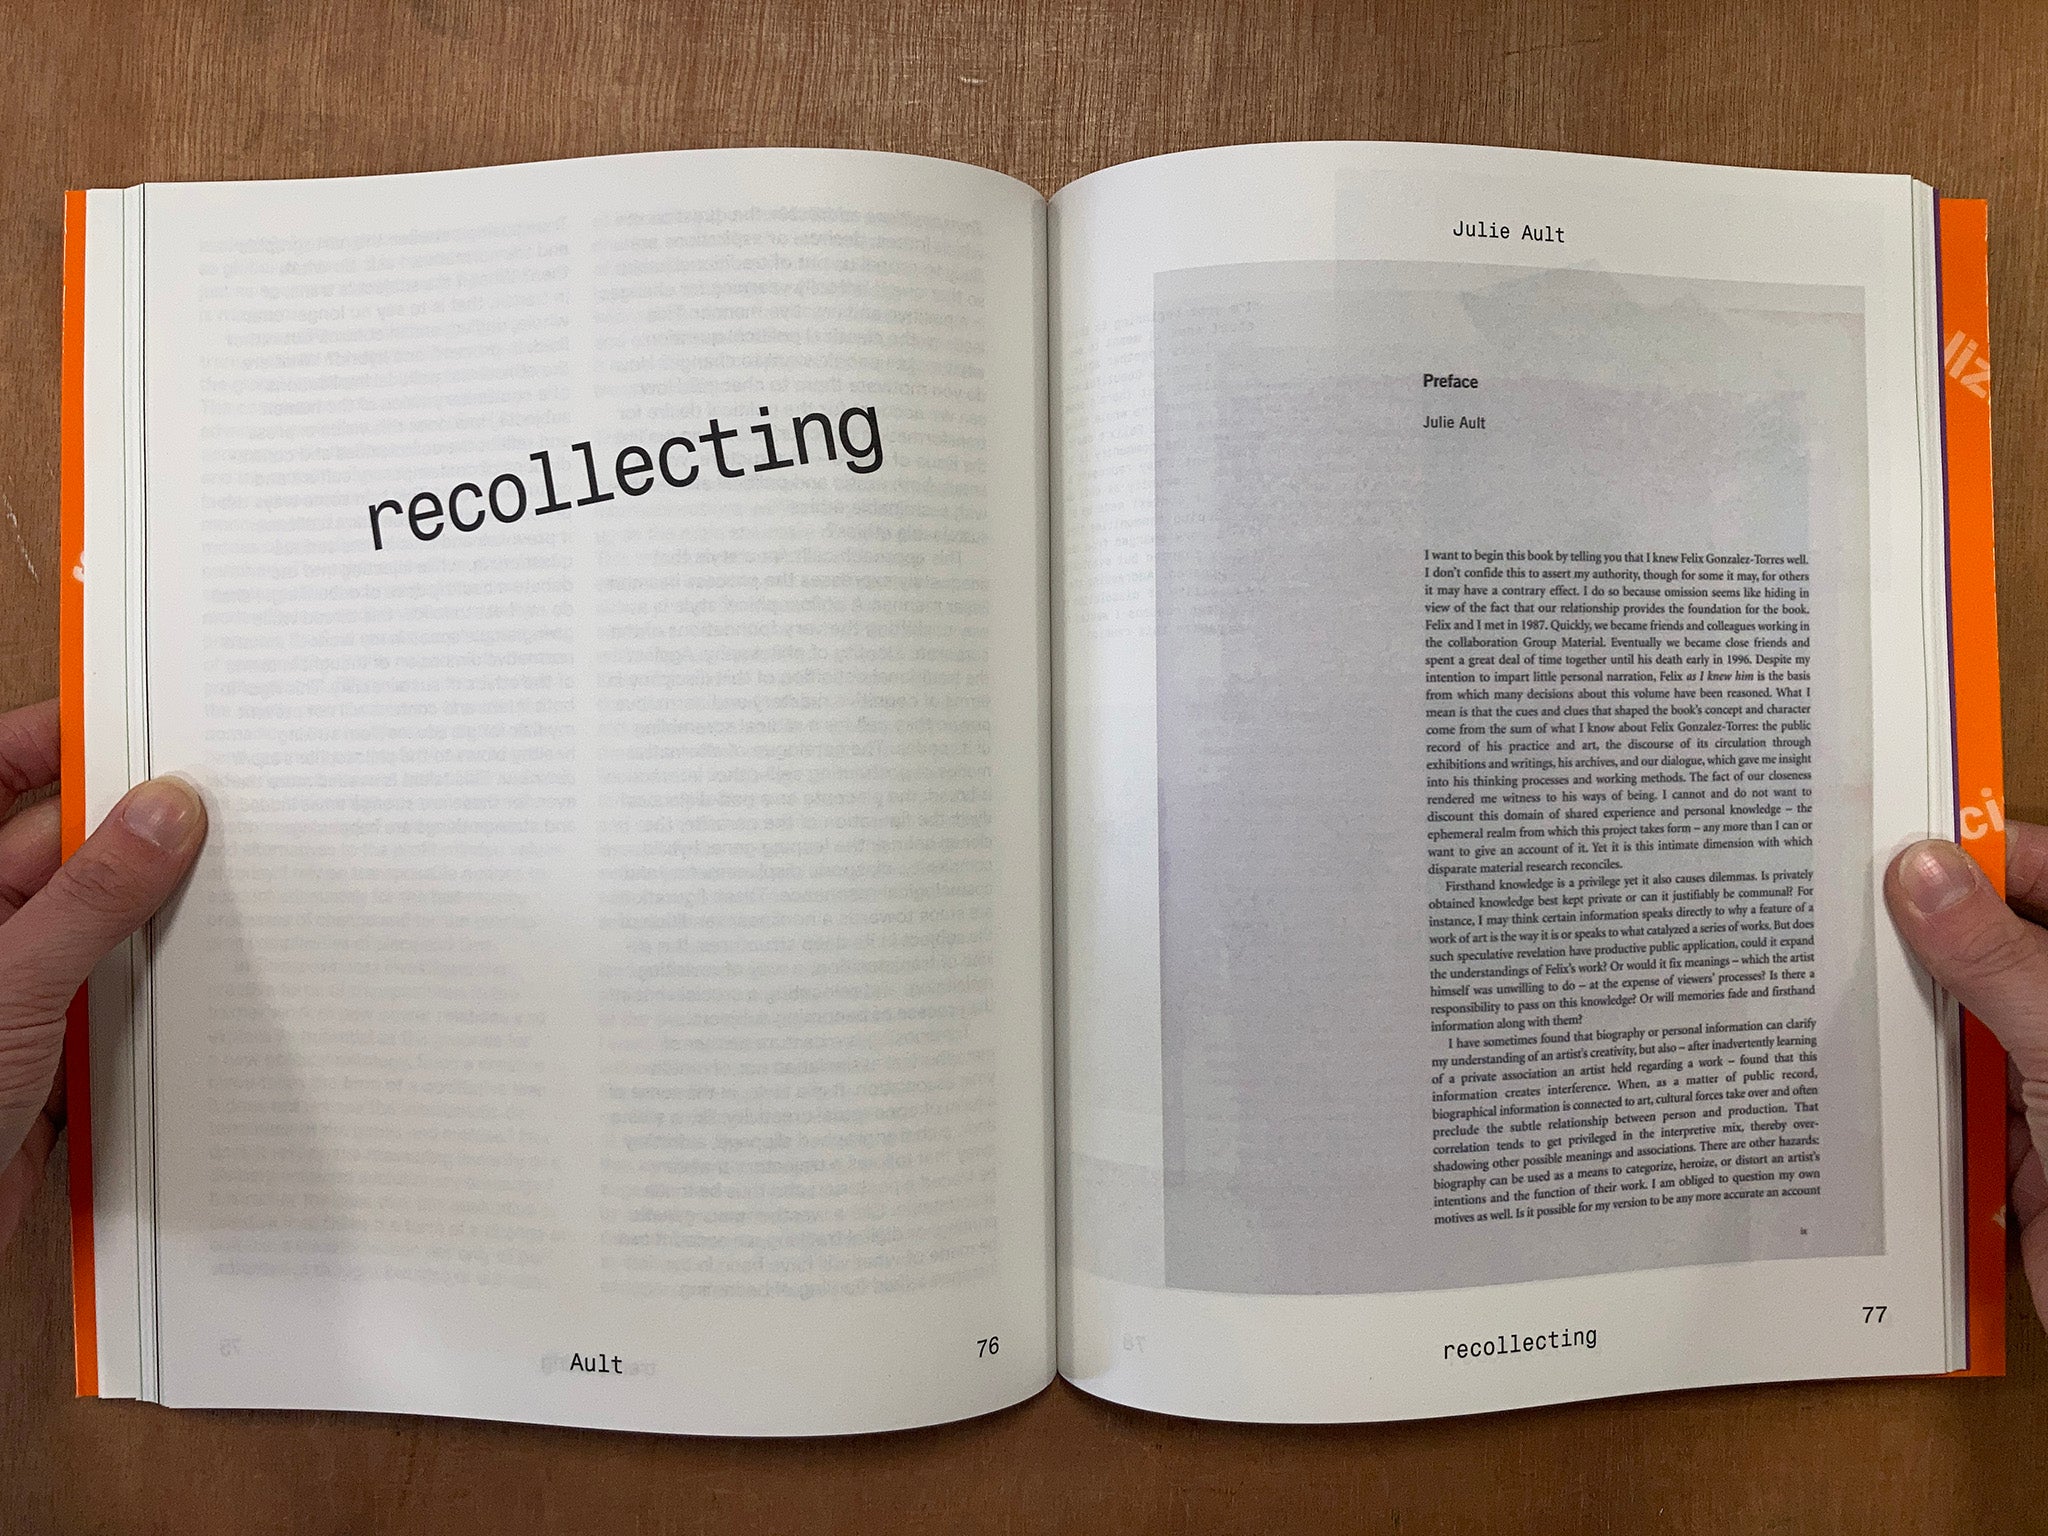 ARCHIVES ON SHOW – REVOICING, SHAPESHIFTING, DISPLACING – A CURATORIAL GLOSSARY edited by Beatrice von Bismarck